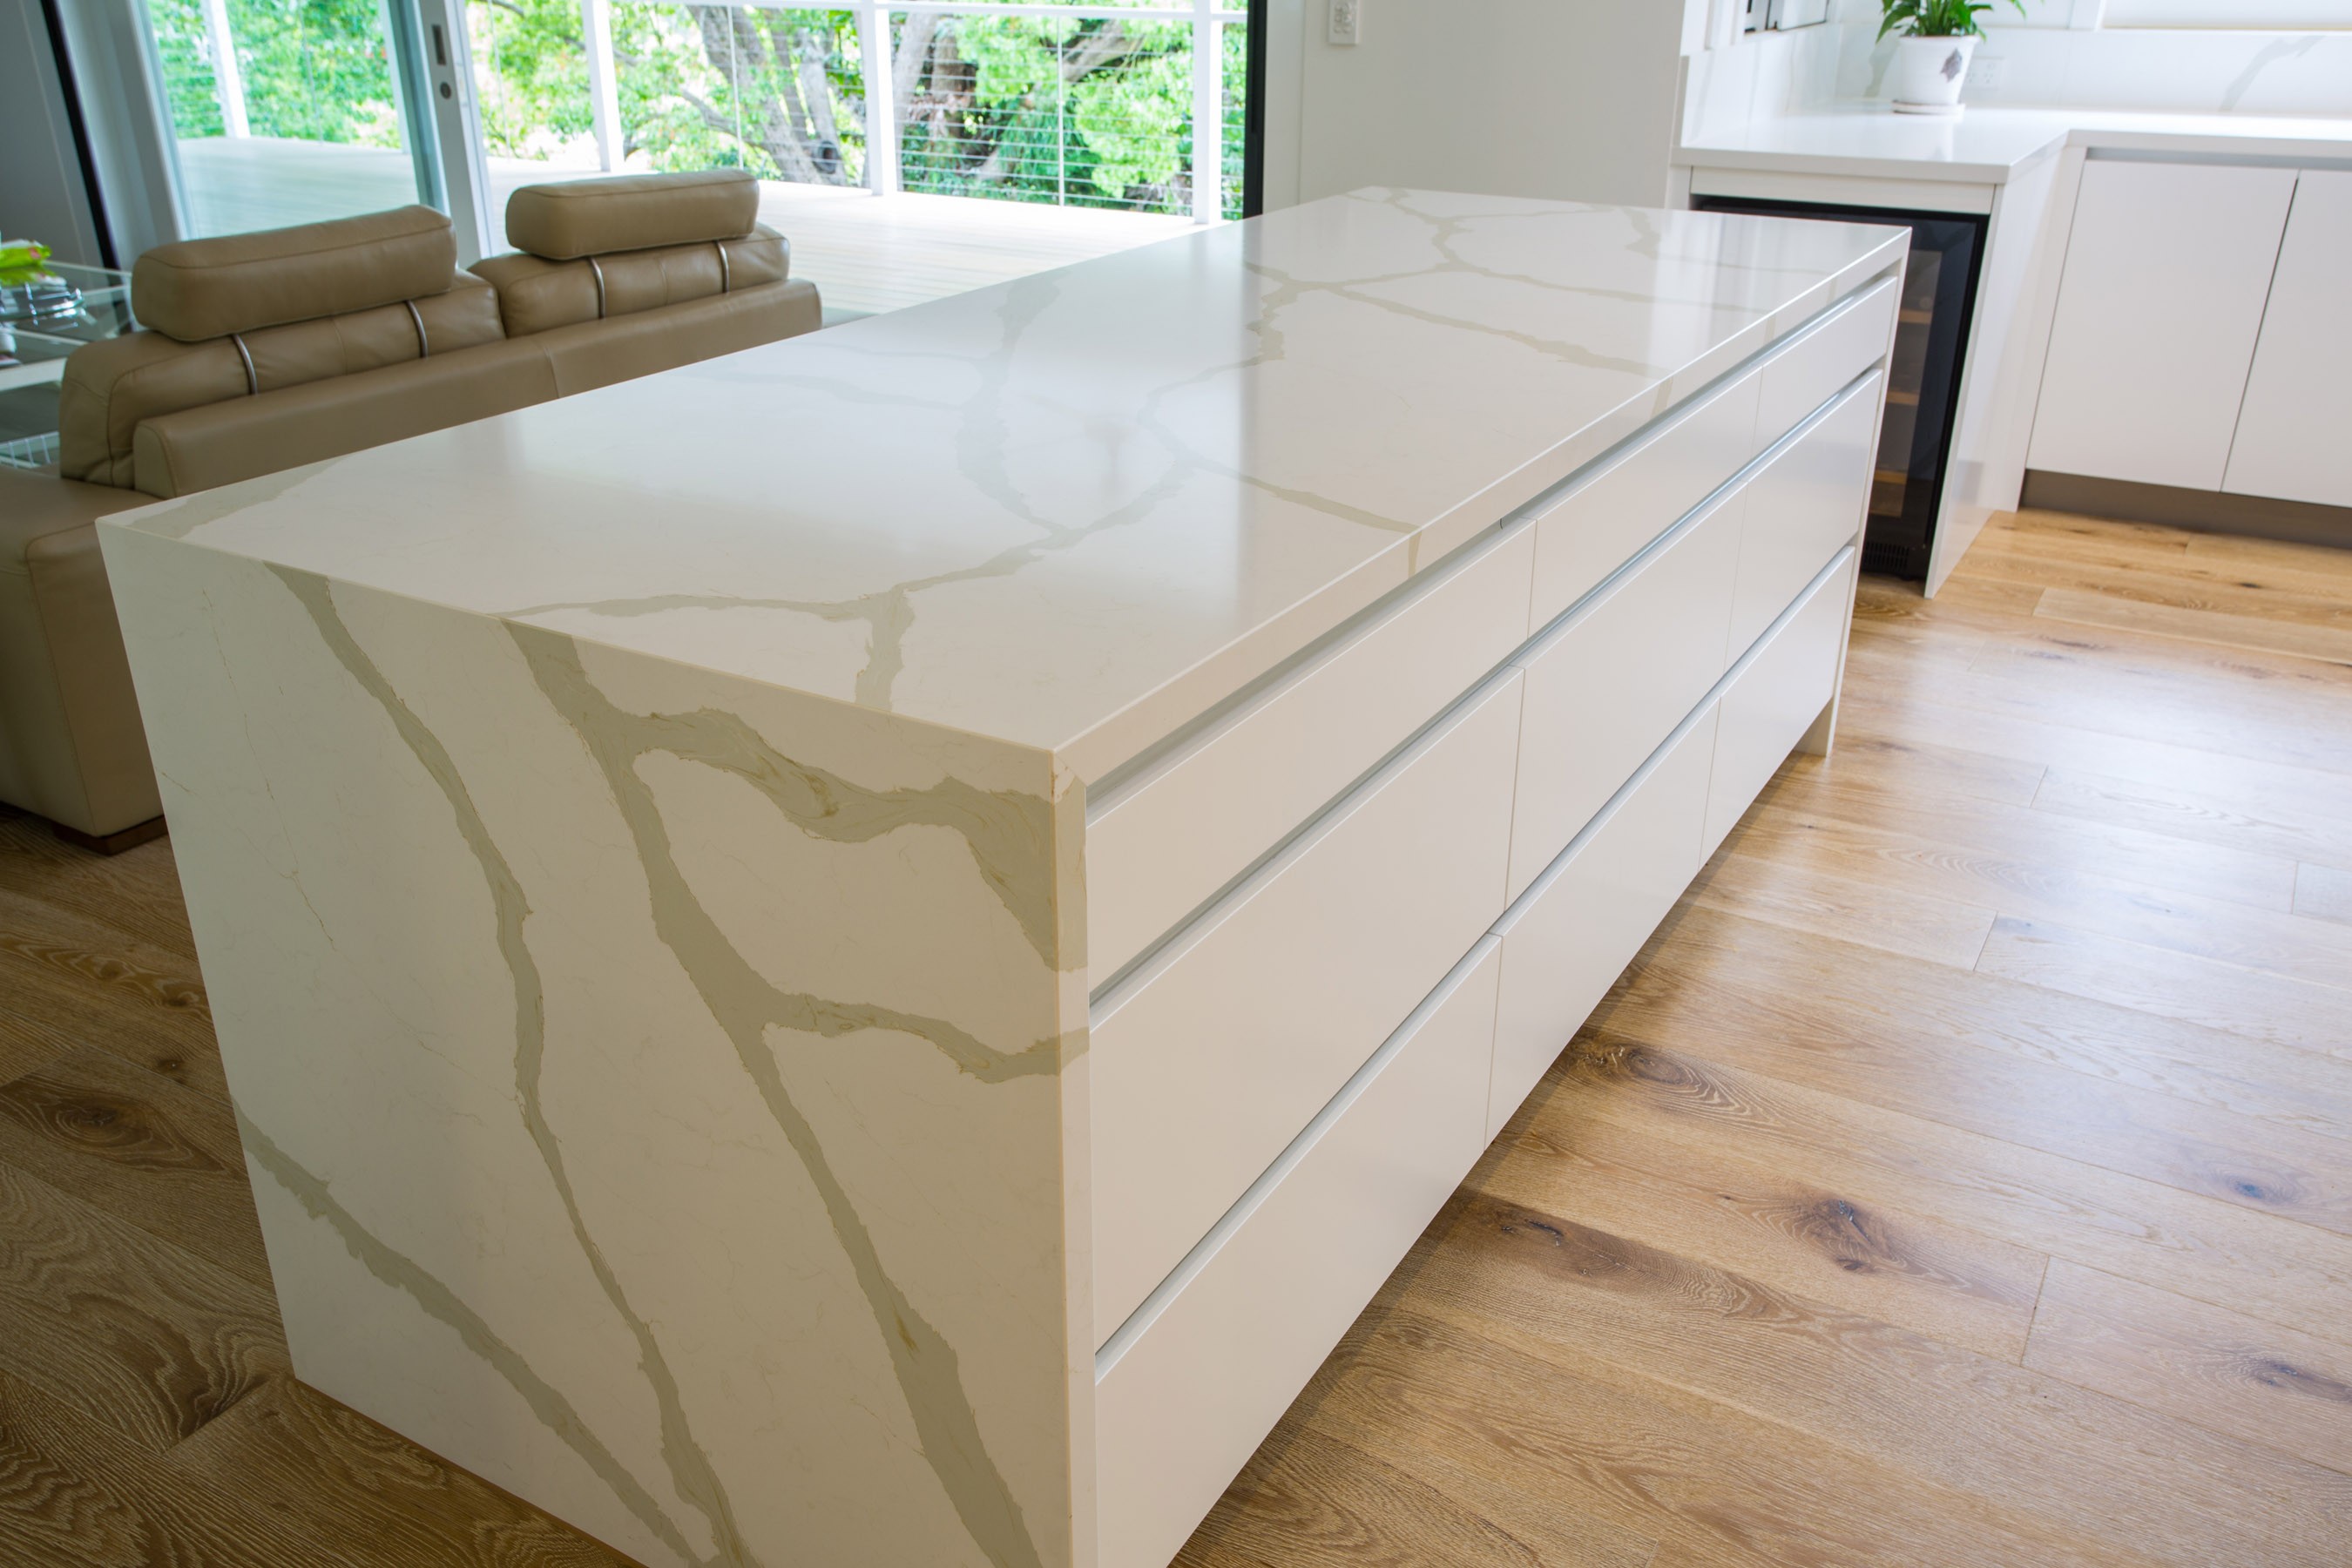 Island-bench-features-large-deep-handle-less-drawers.jpg